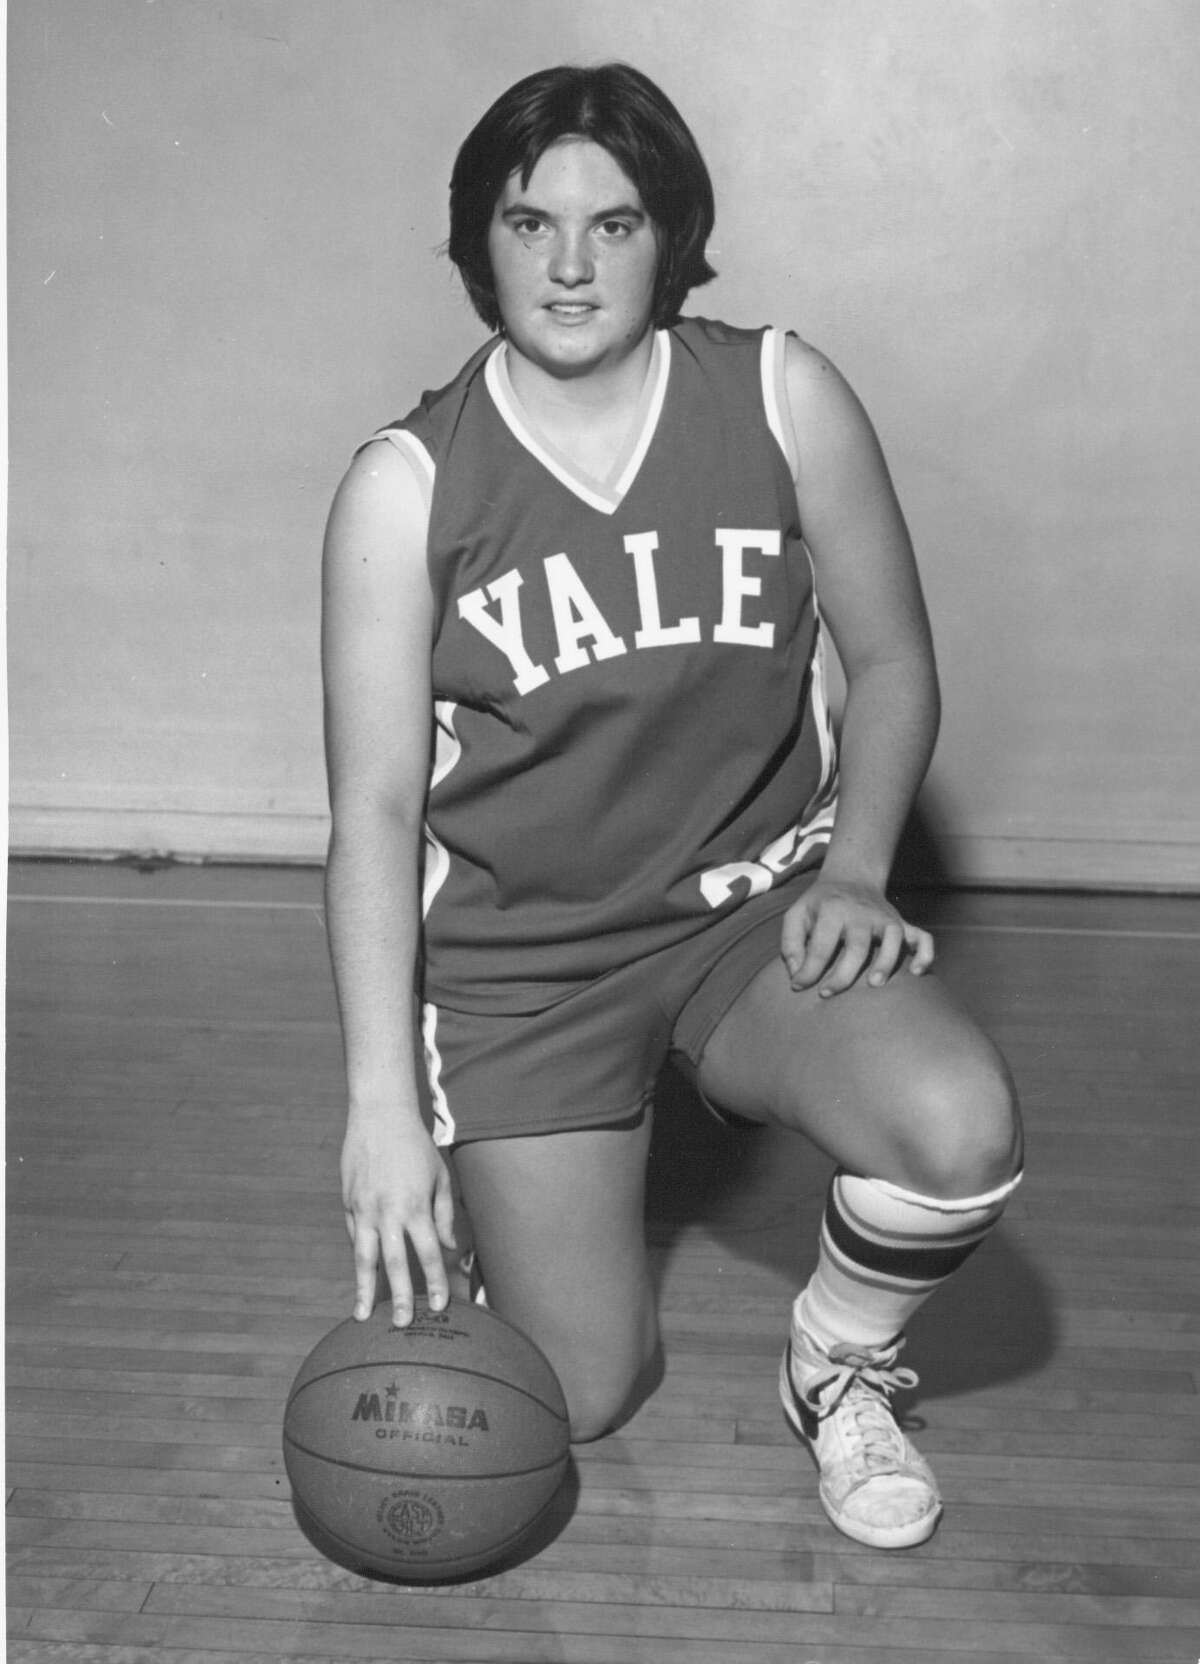 Lisa Brummel was a four-sport athlete at Yale from 1977-1981. She was senior captain of the women's basketball team and earned team MVP honors all four years.